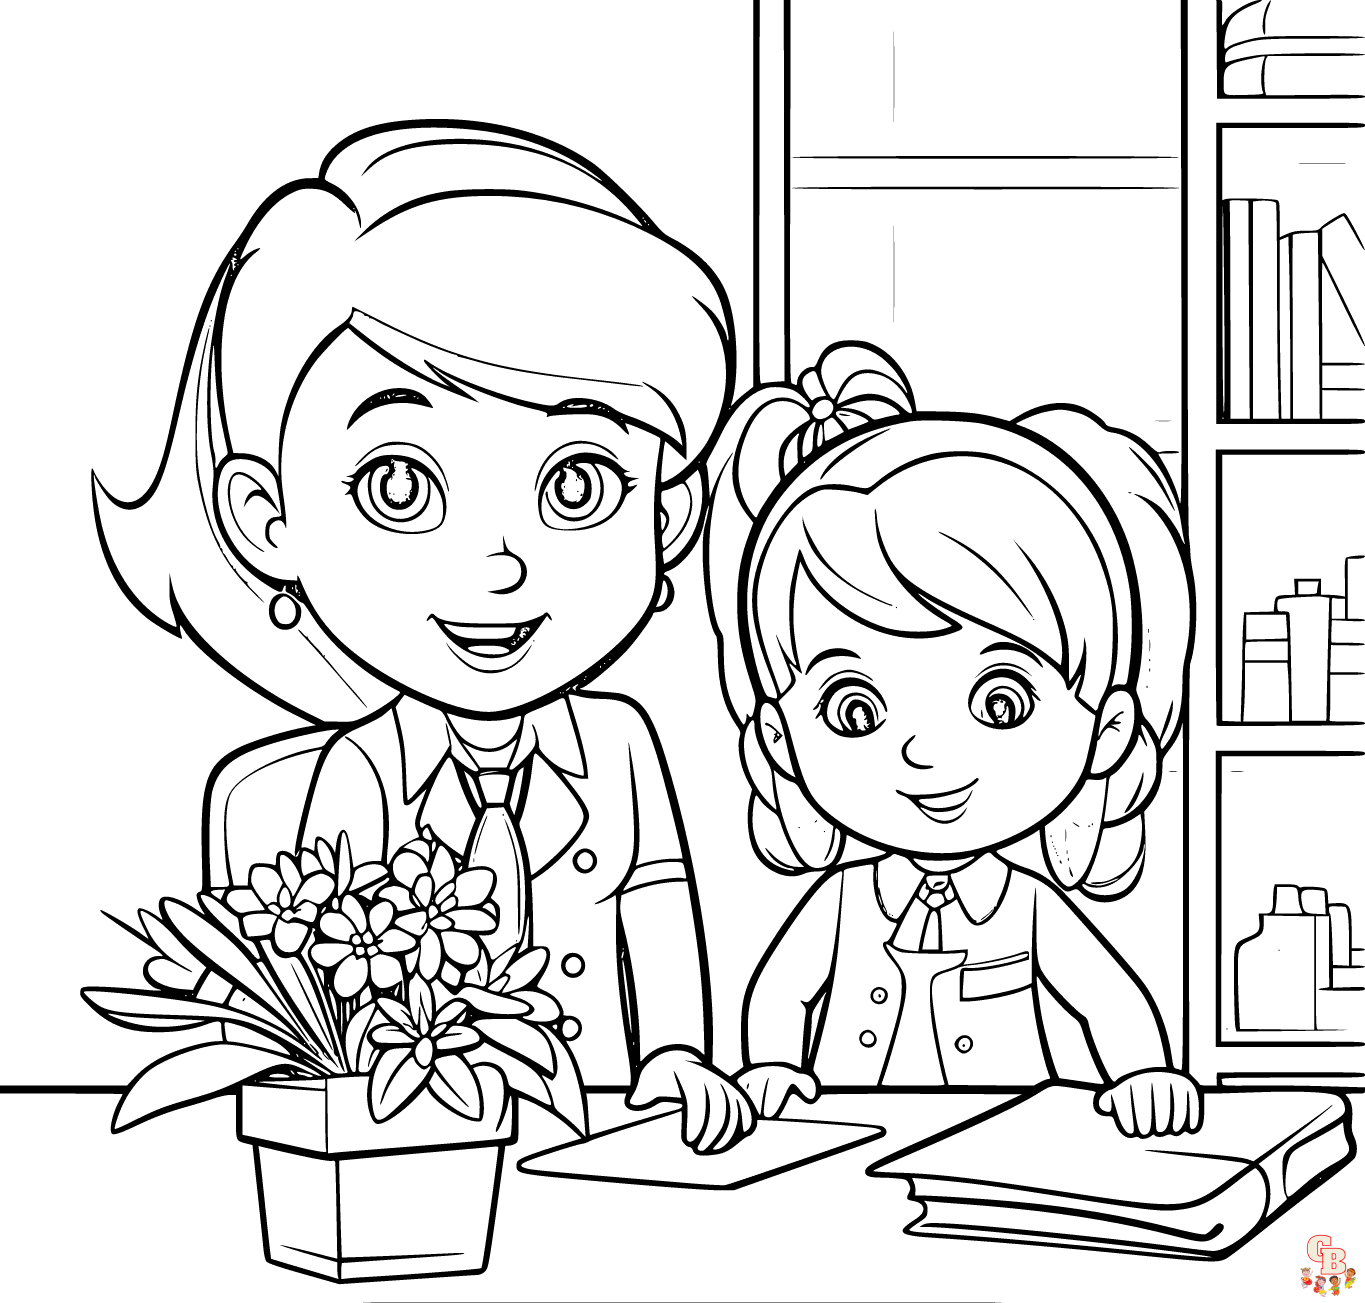 Printable administrative professionals day coloring sheets